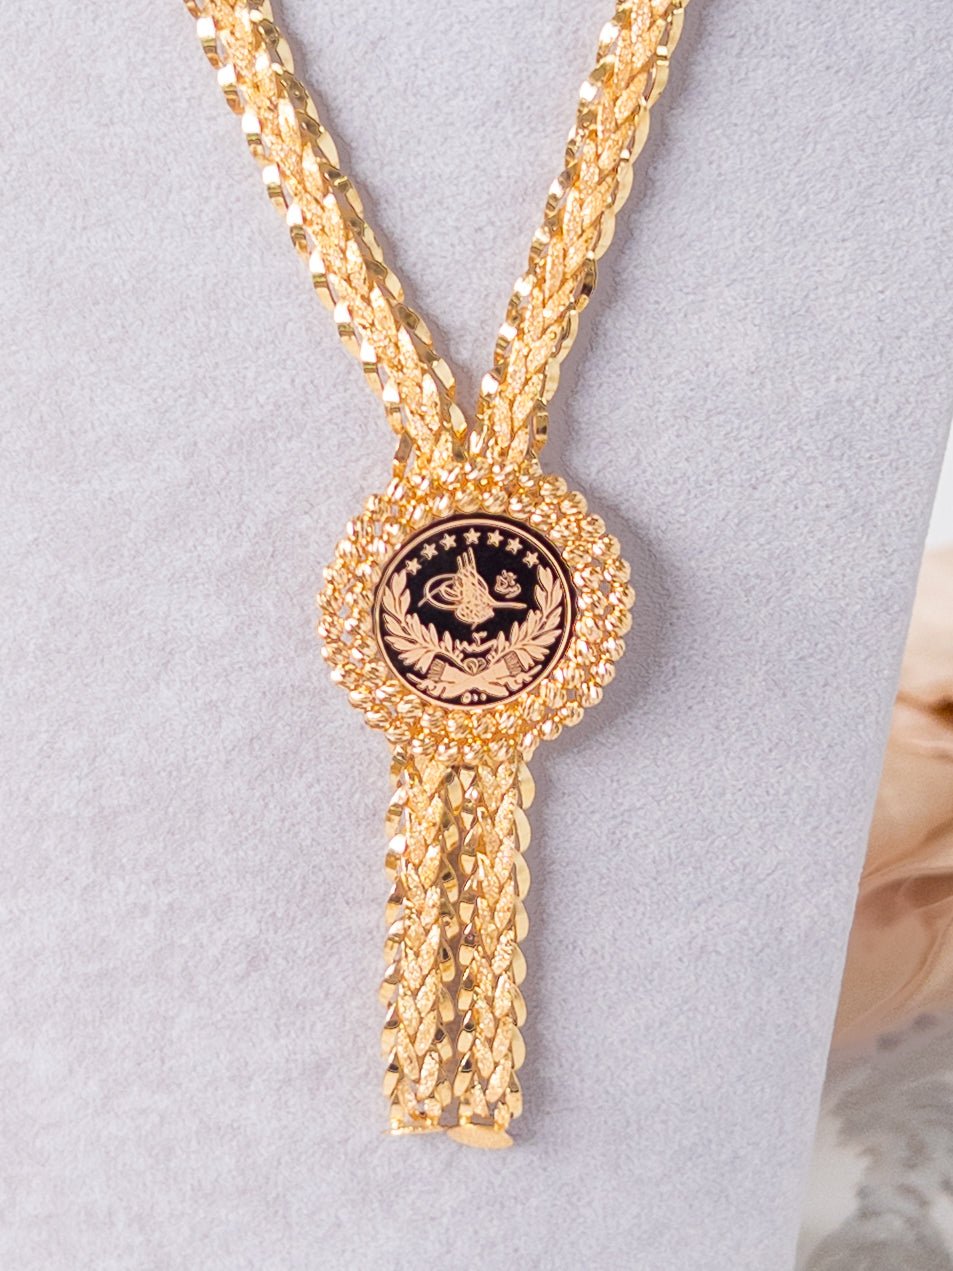 21k Gold Coin Necklace - Cleopatra Jewelers